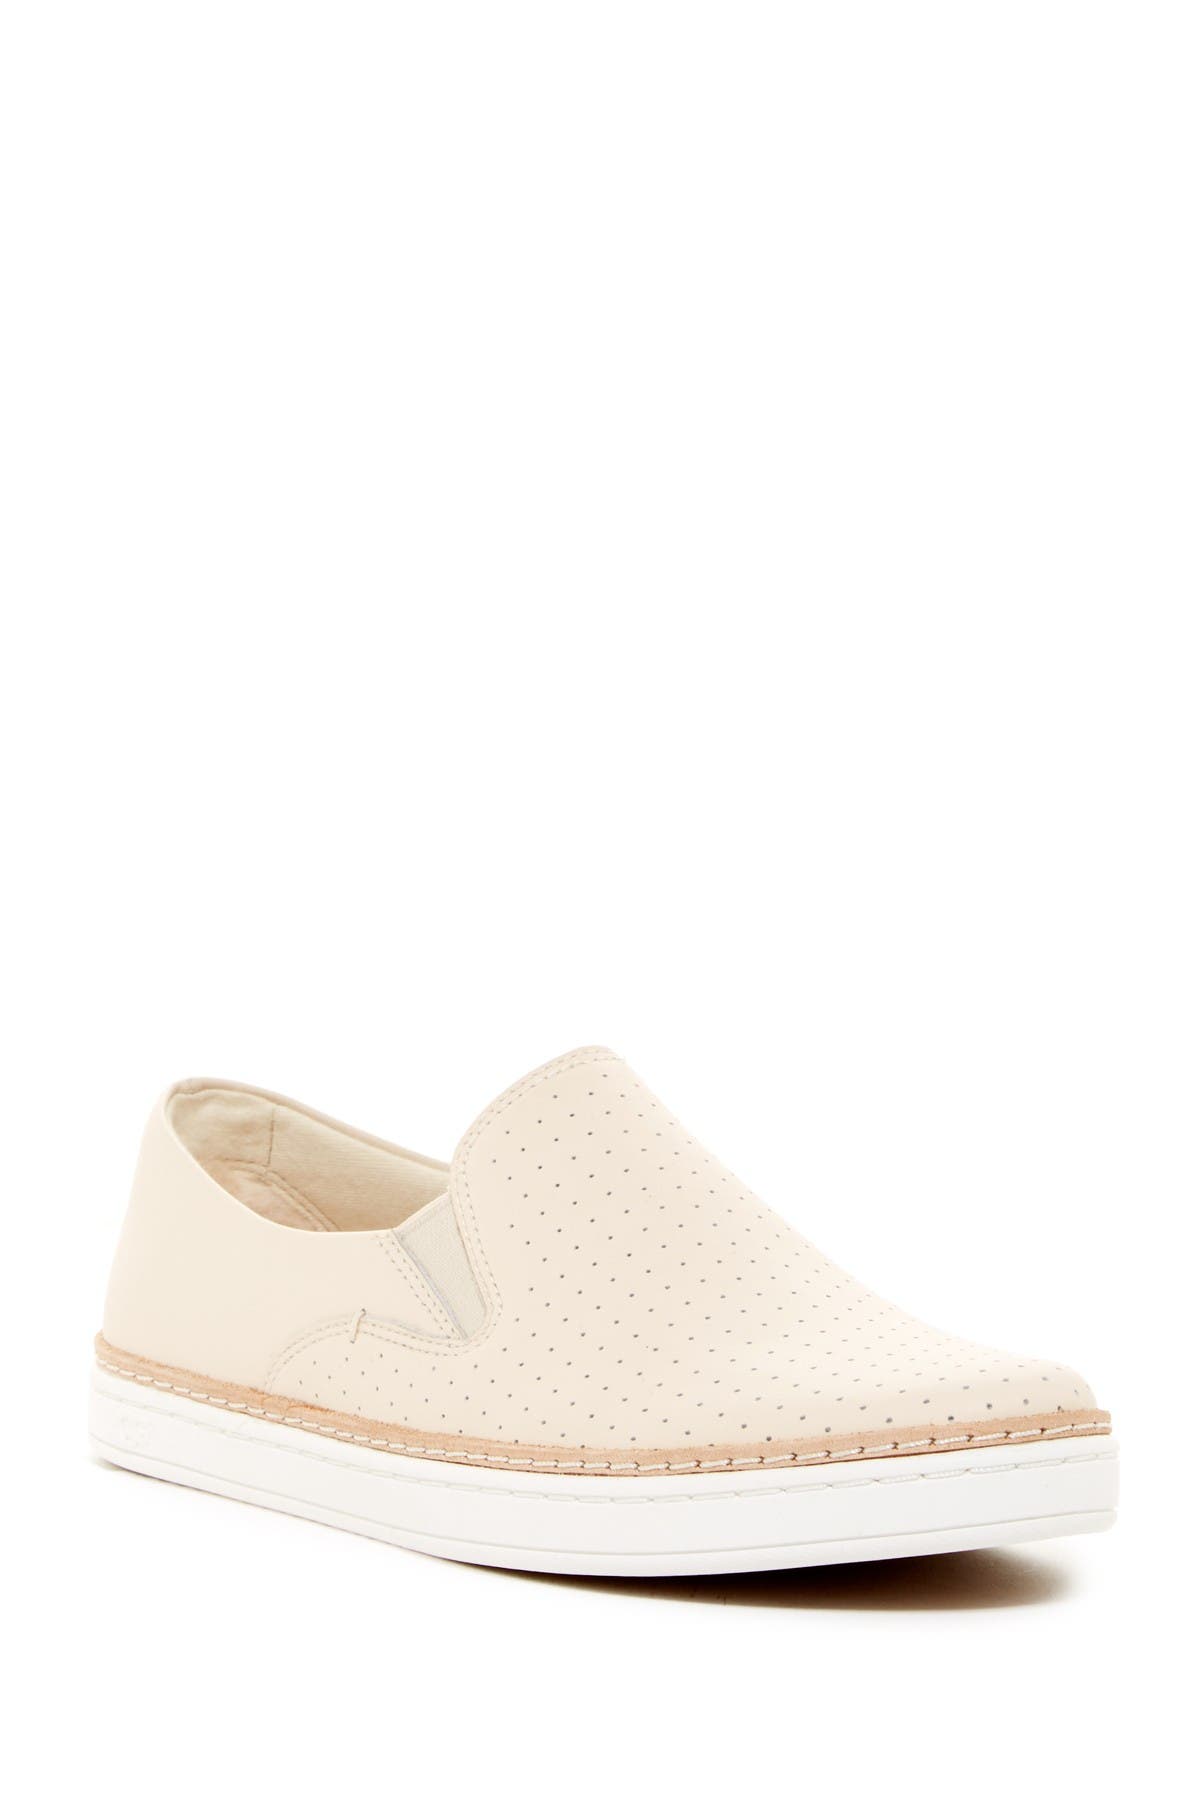 ugg perforated sneakers